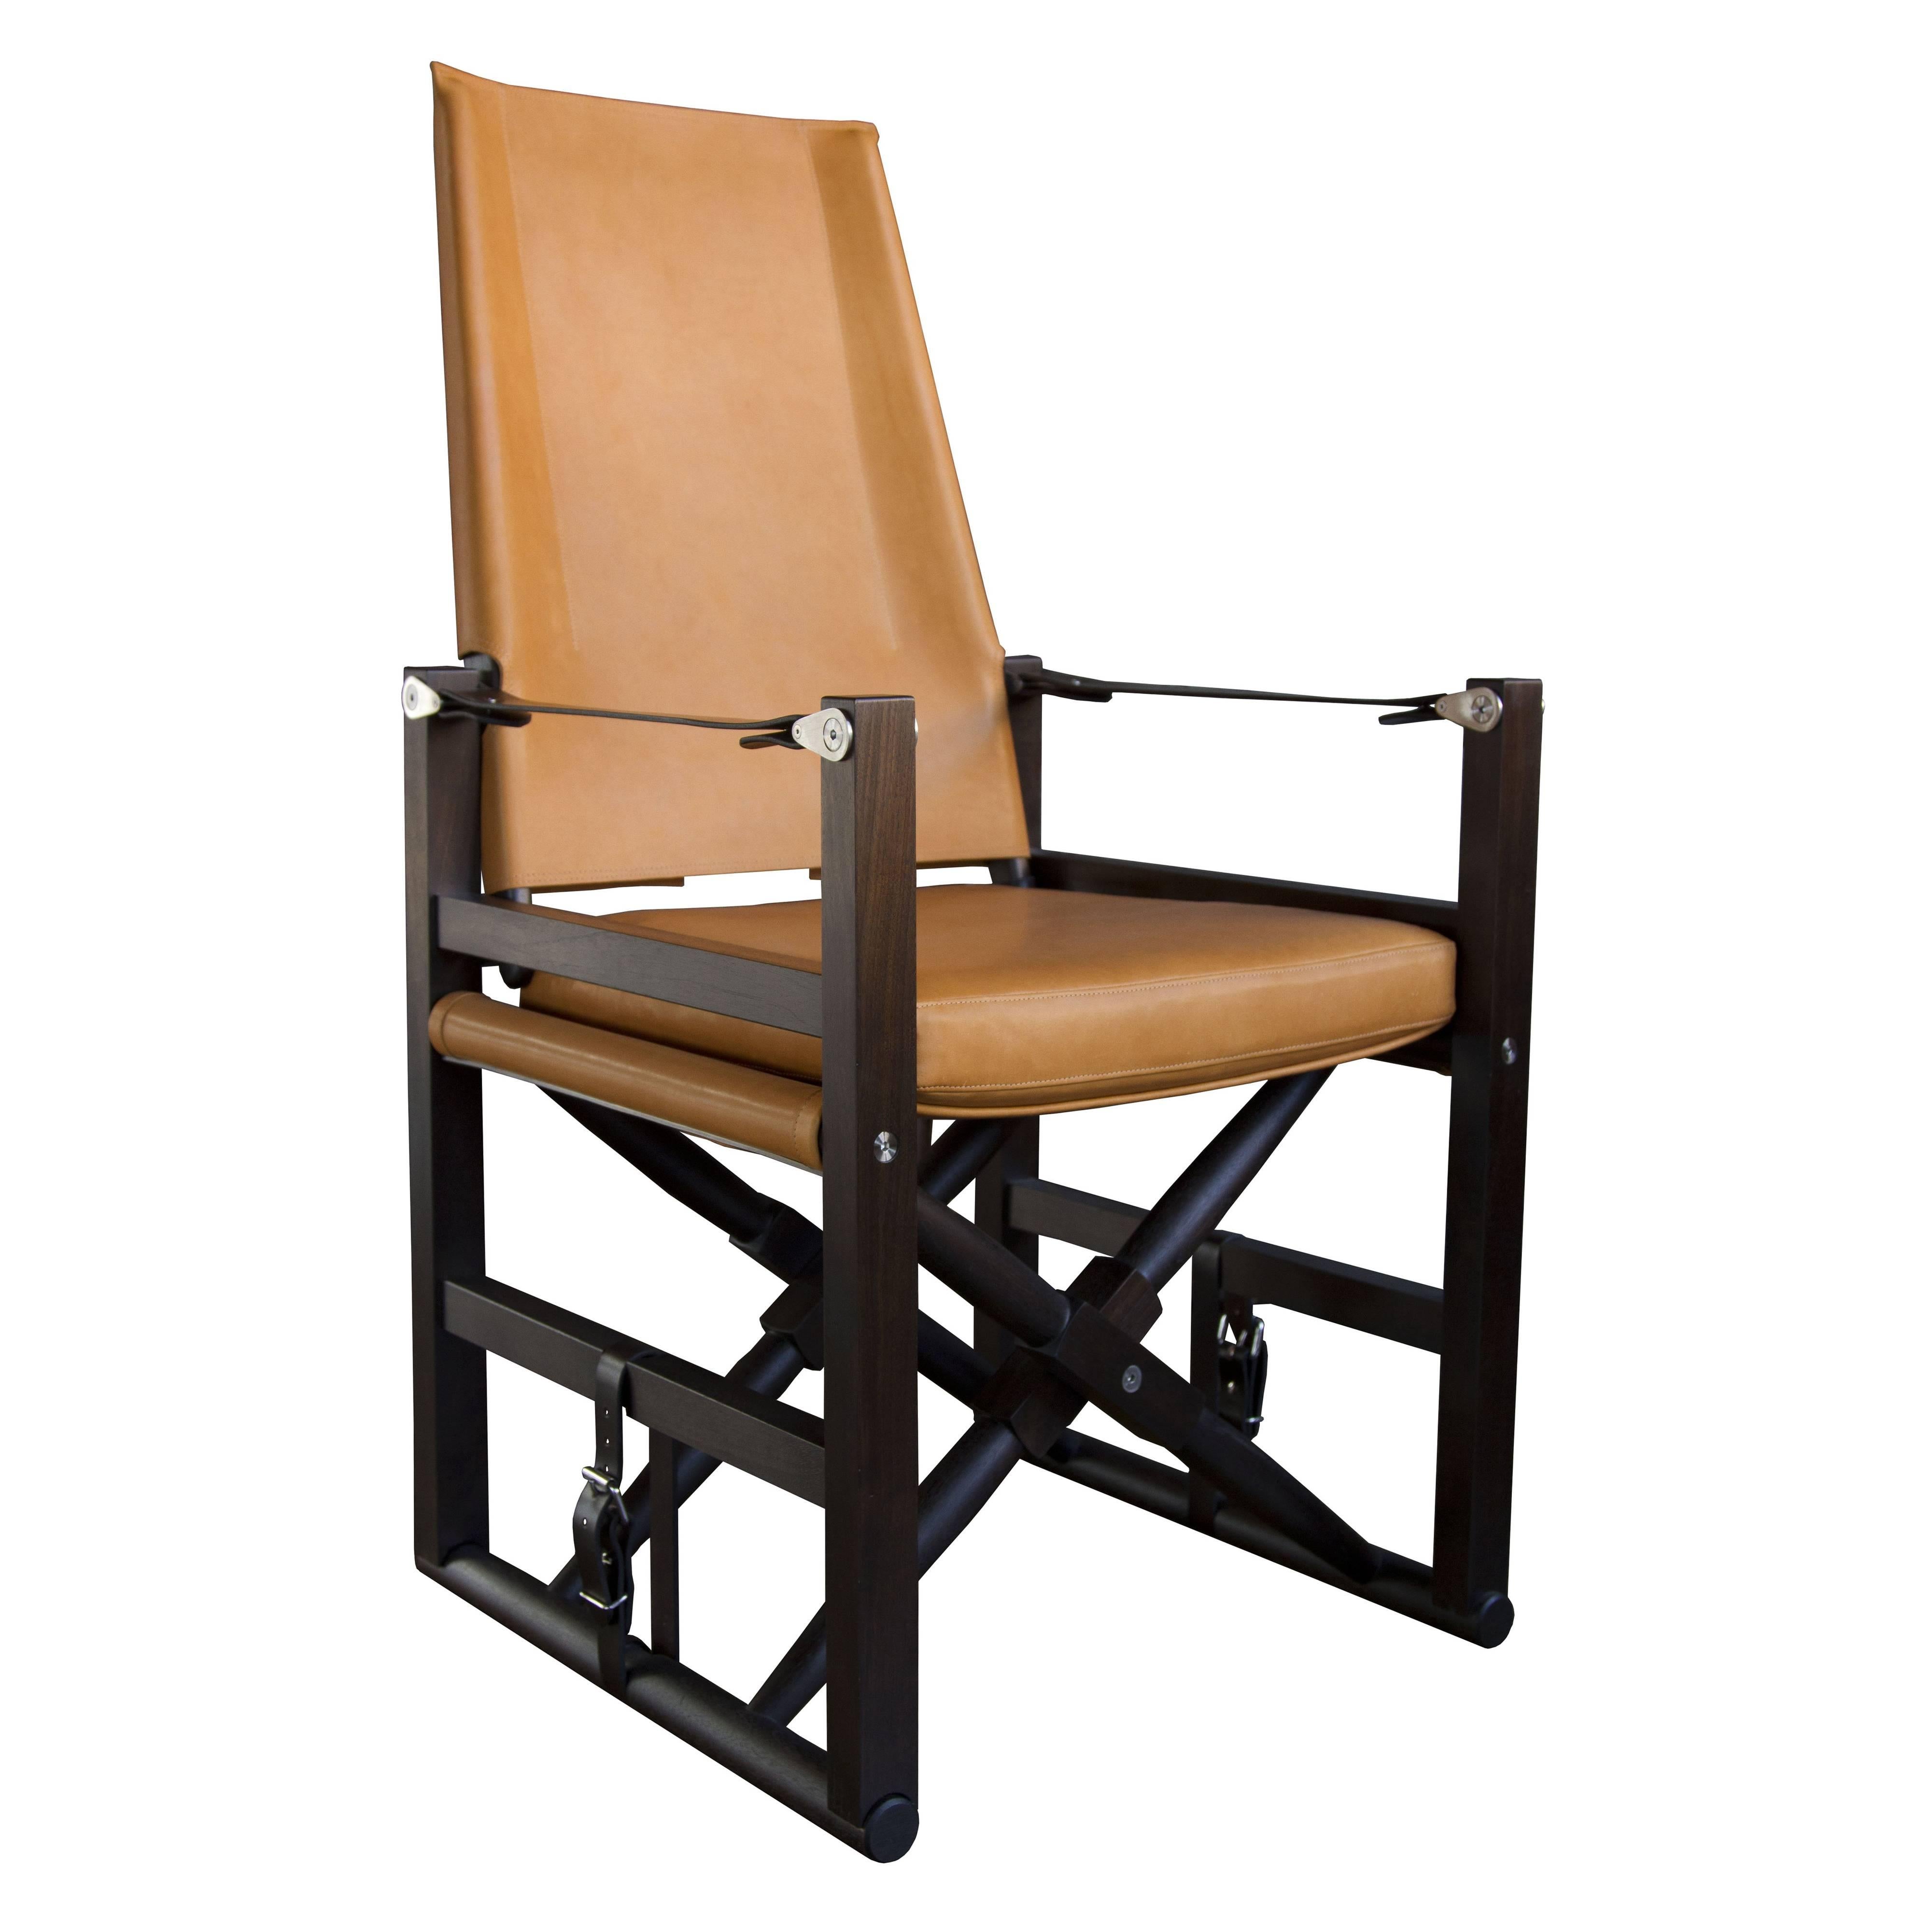 Folding Cabourn Sail Chair - handcrafted by Richard Wrightman Design